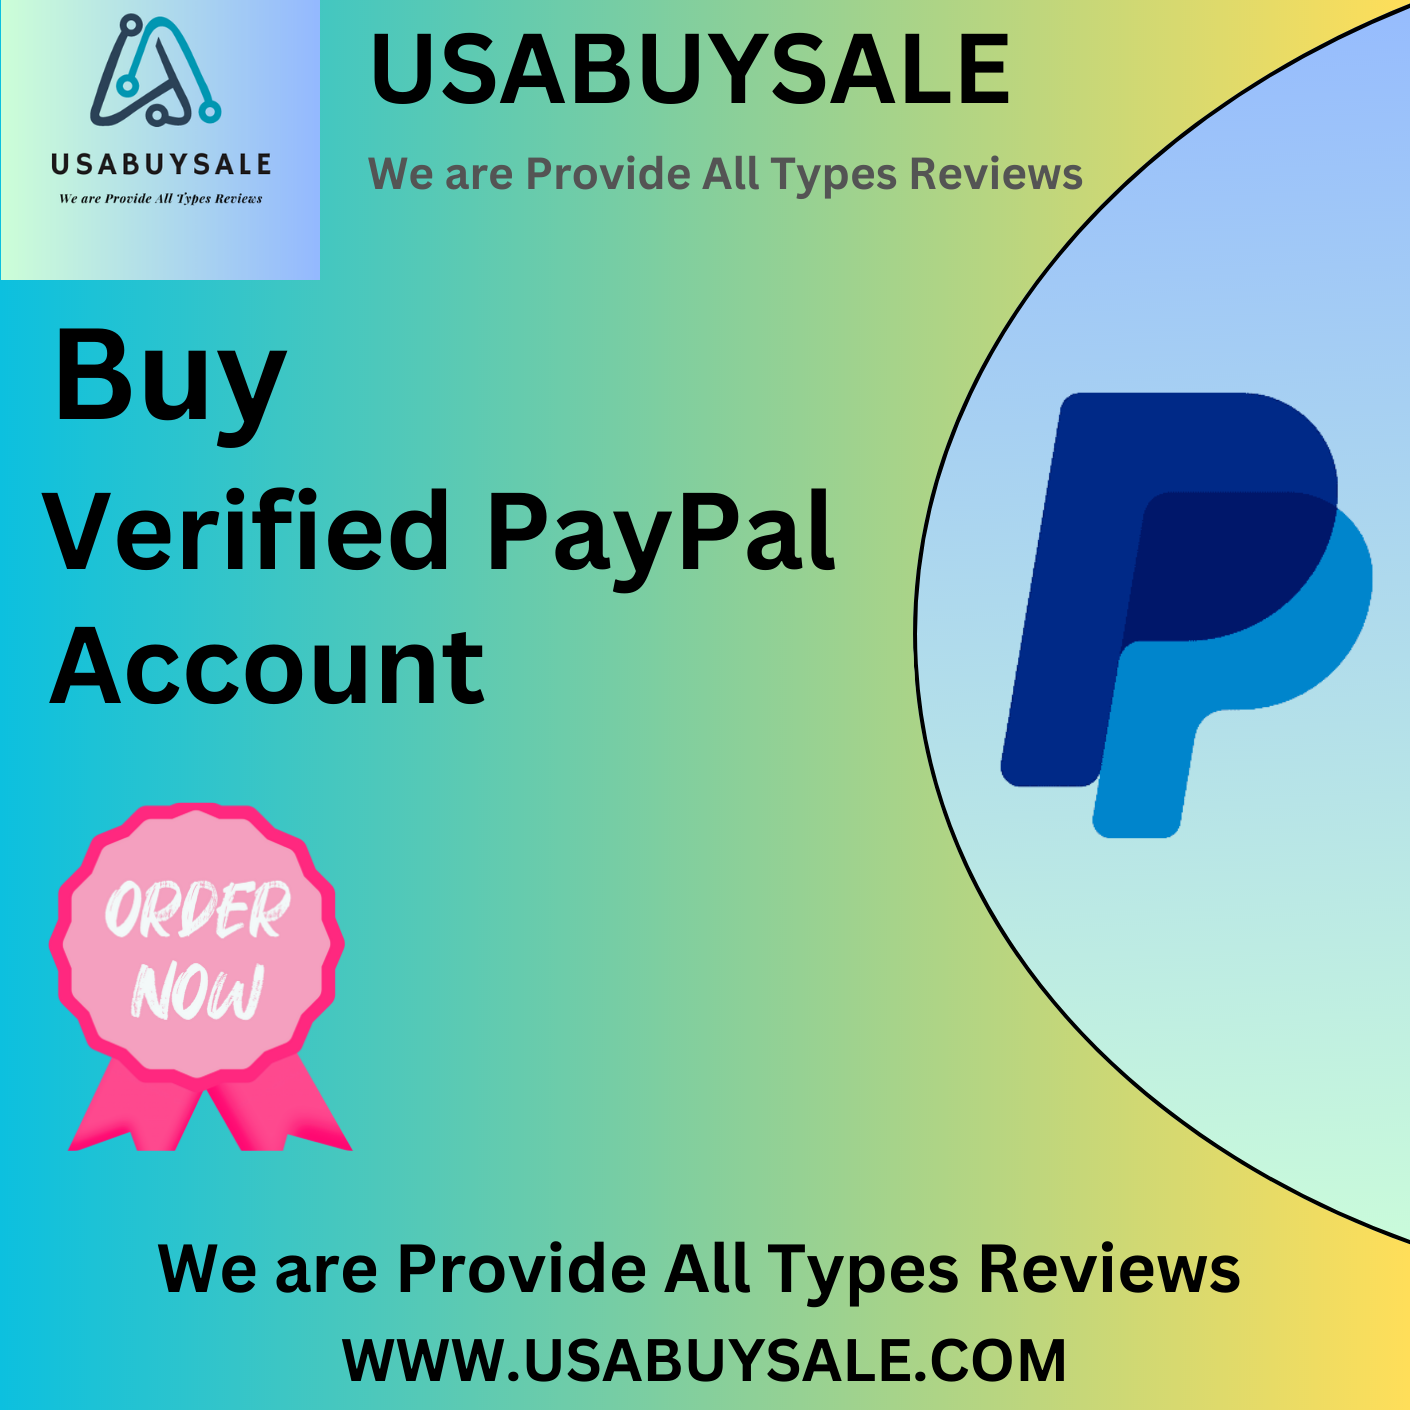 Buy Verified PayPal Account - $50 Fixed Price & Positive